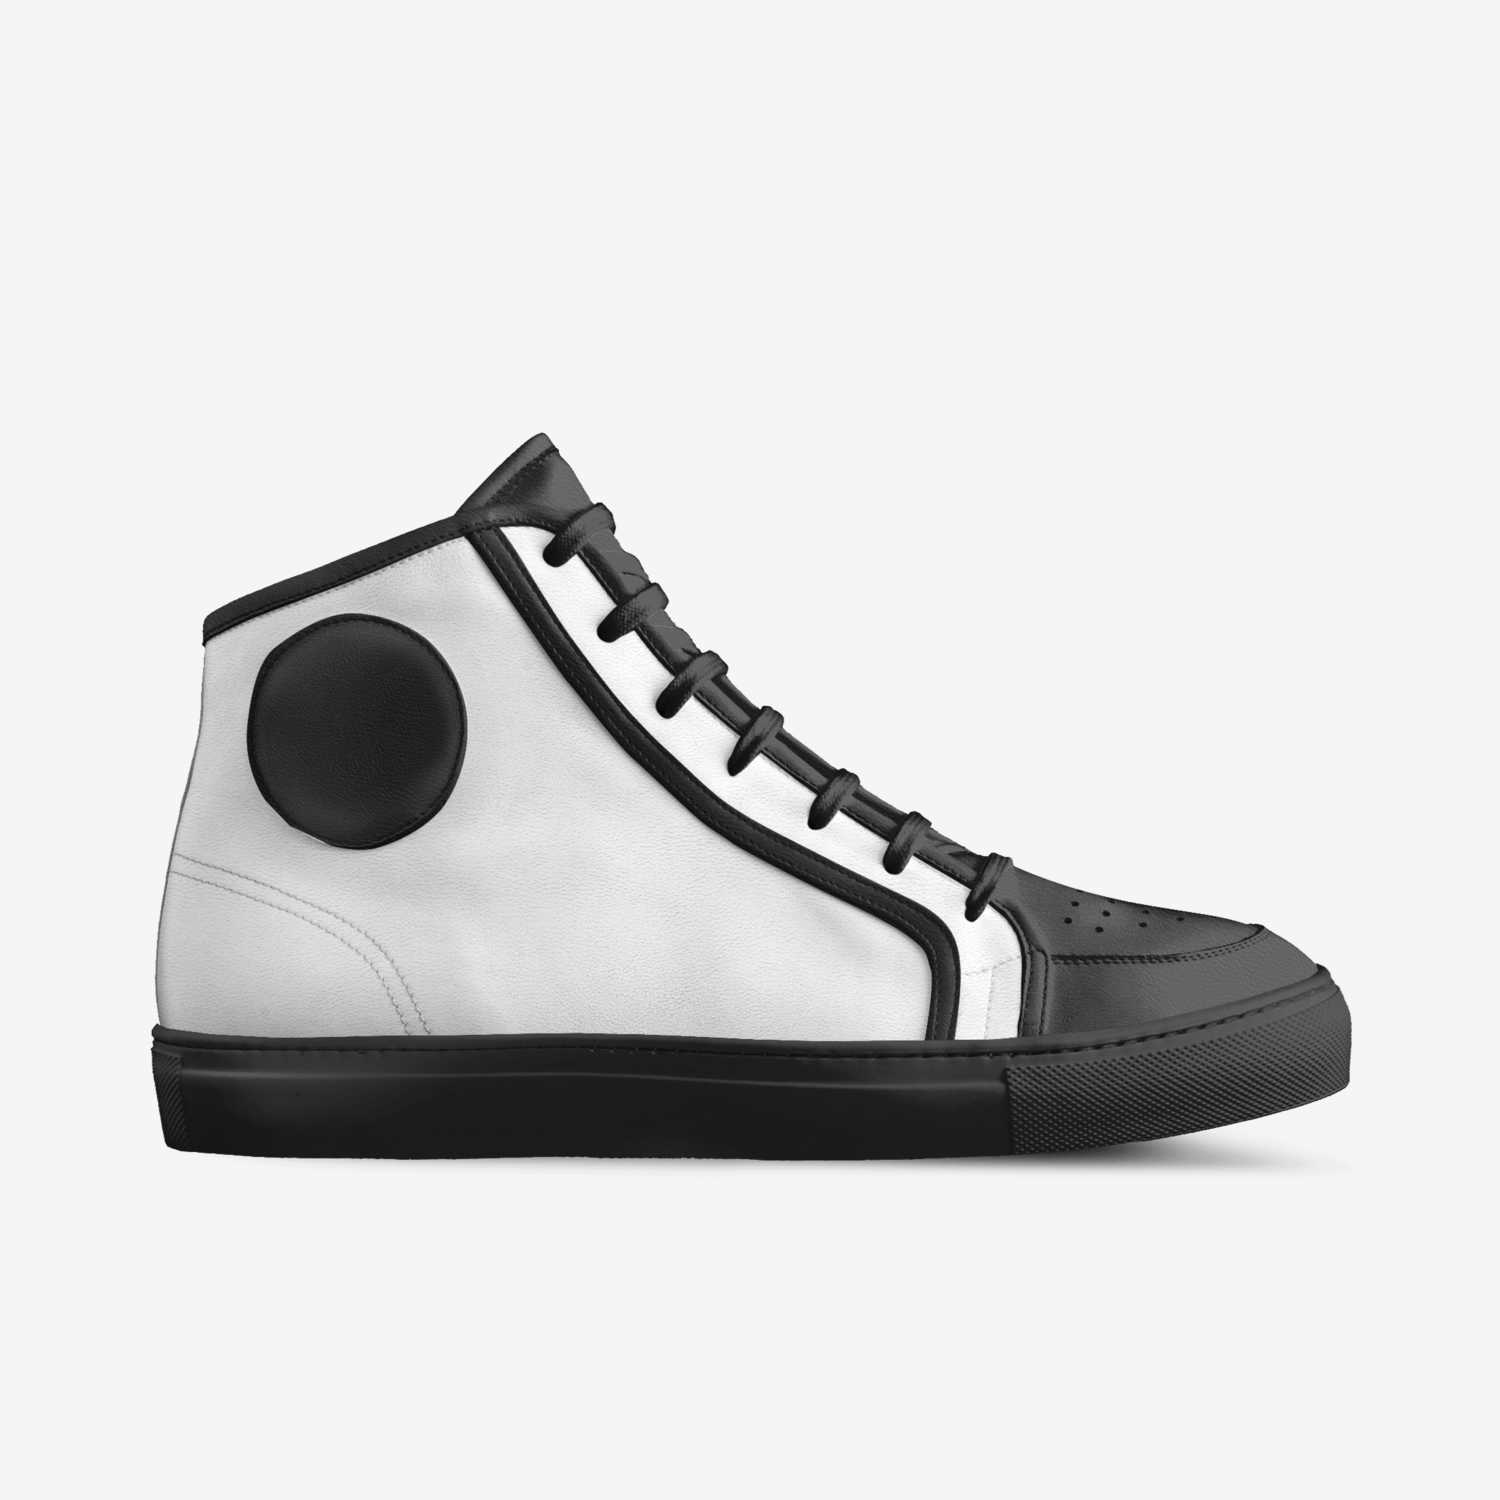 Drip By Dréko custom made in Italy shoes by Zachary Orleans-aikins | Side view